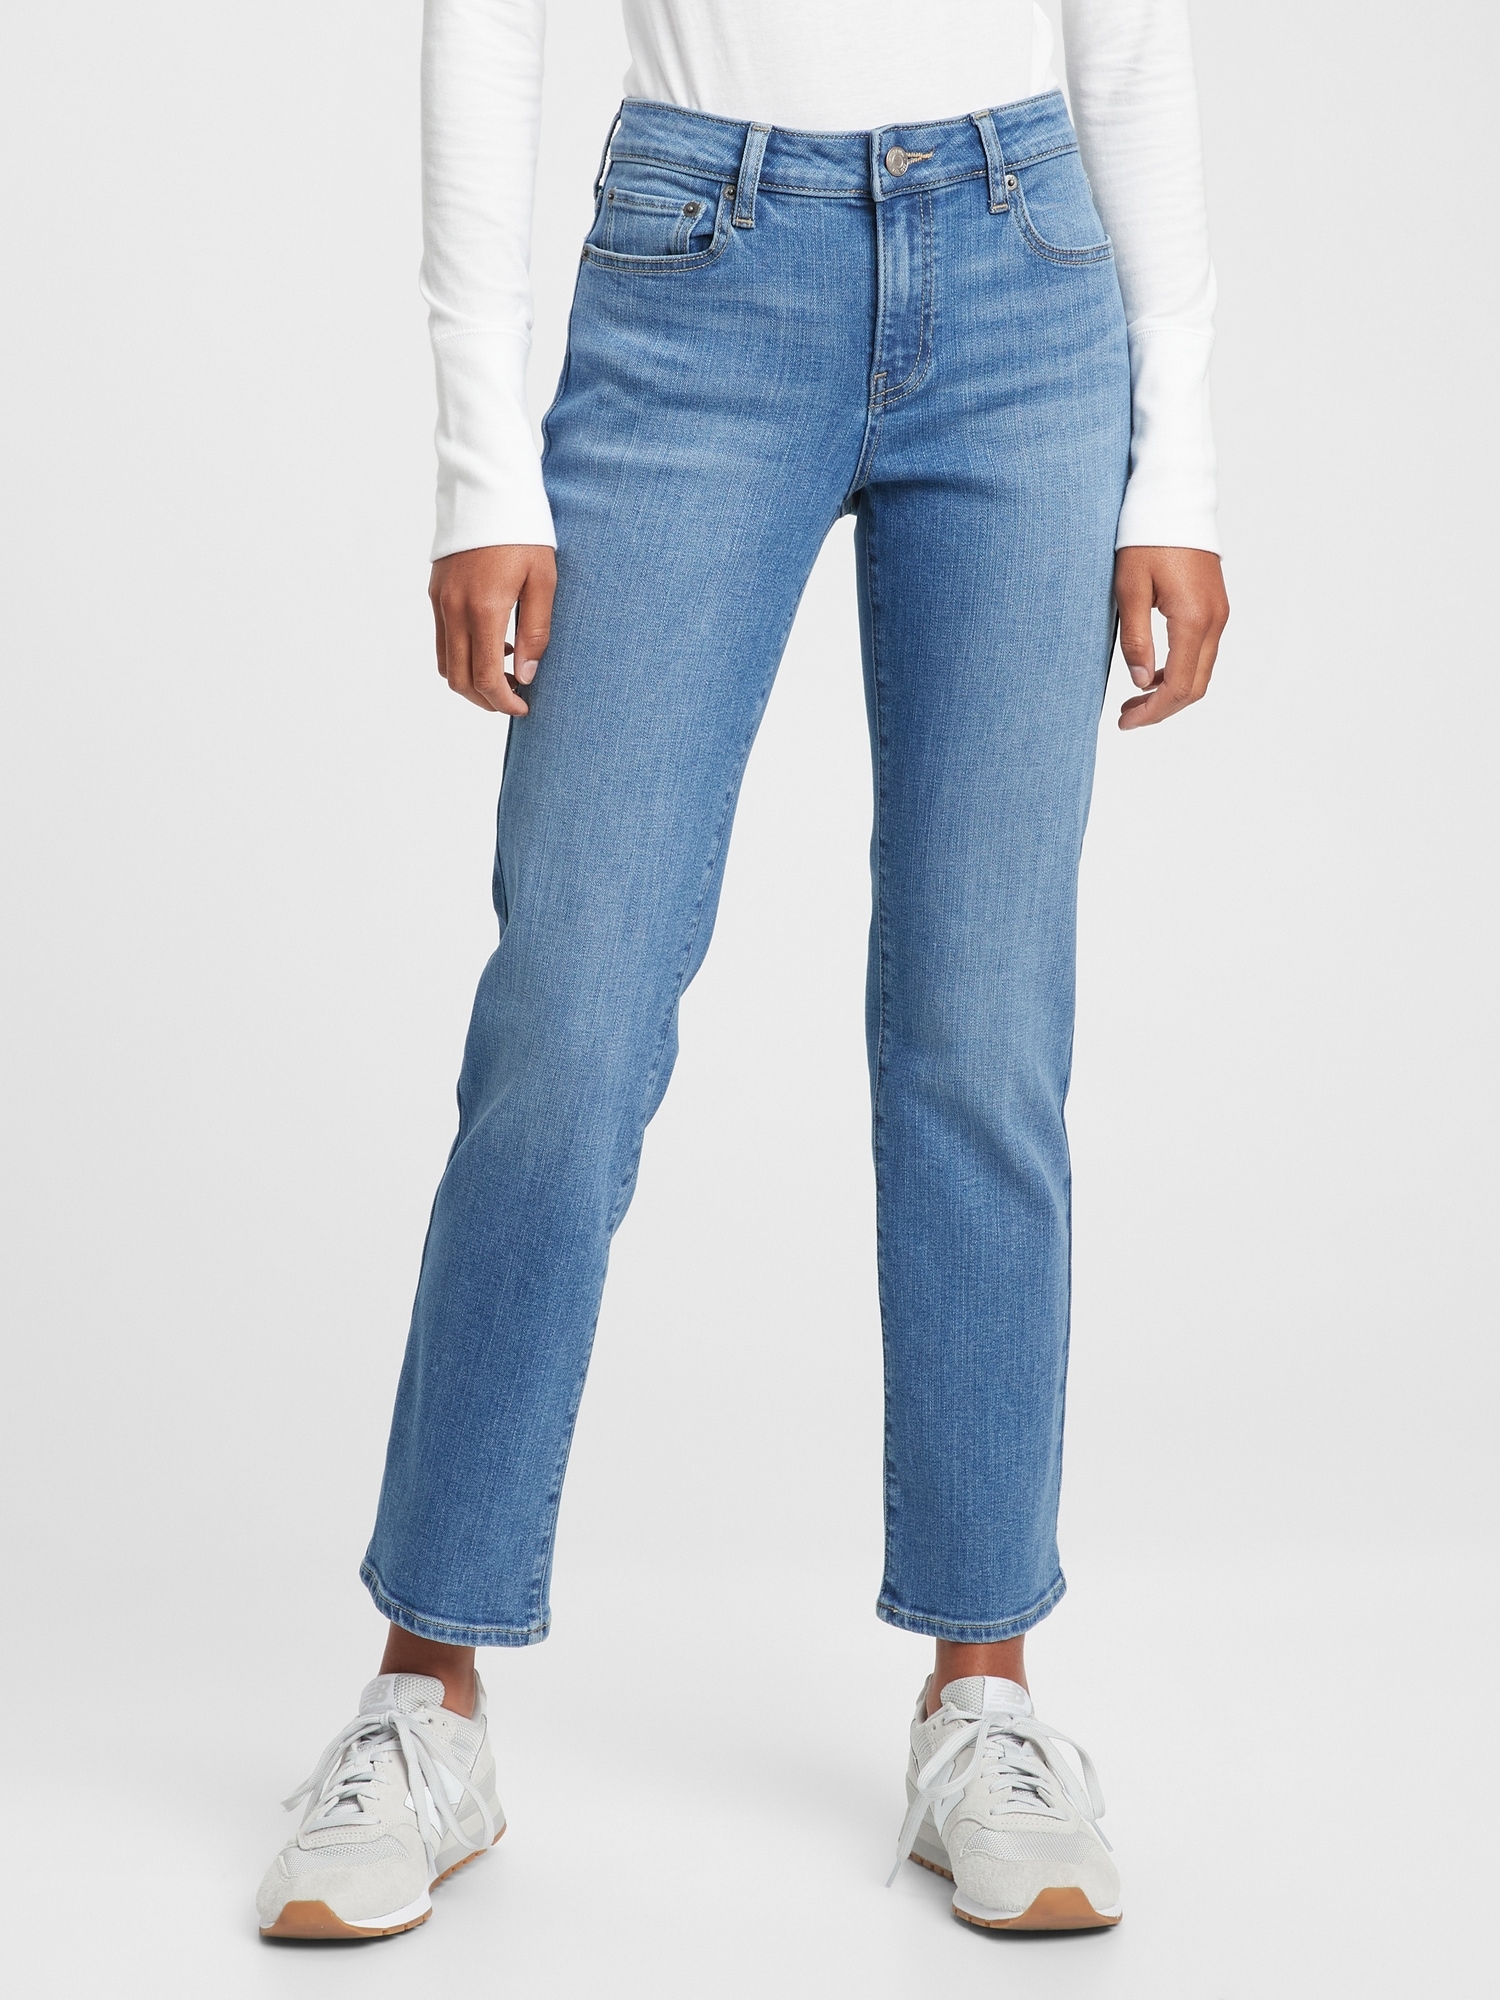 Buy Gap Mid Rise Straight Jeans with Washwell from the Gap online shop